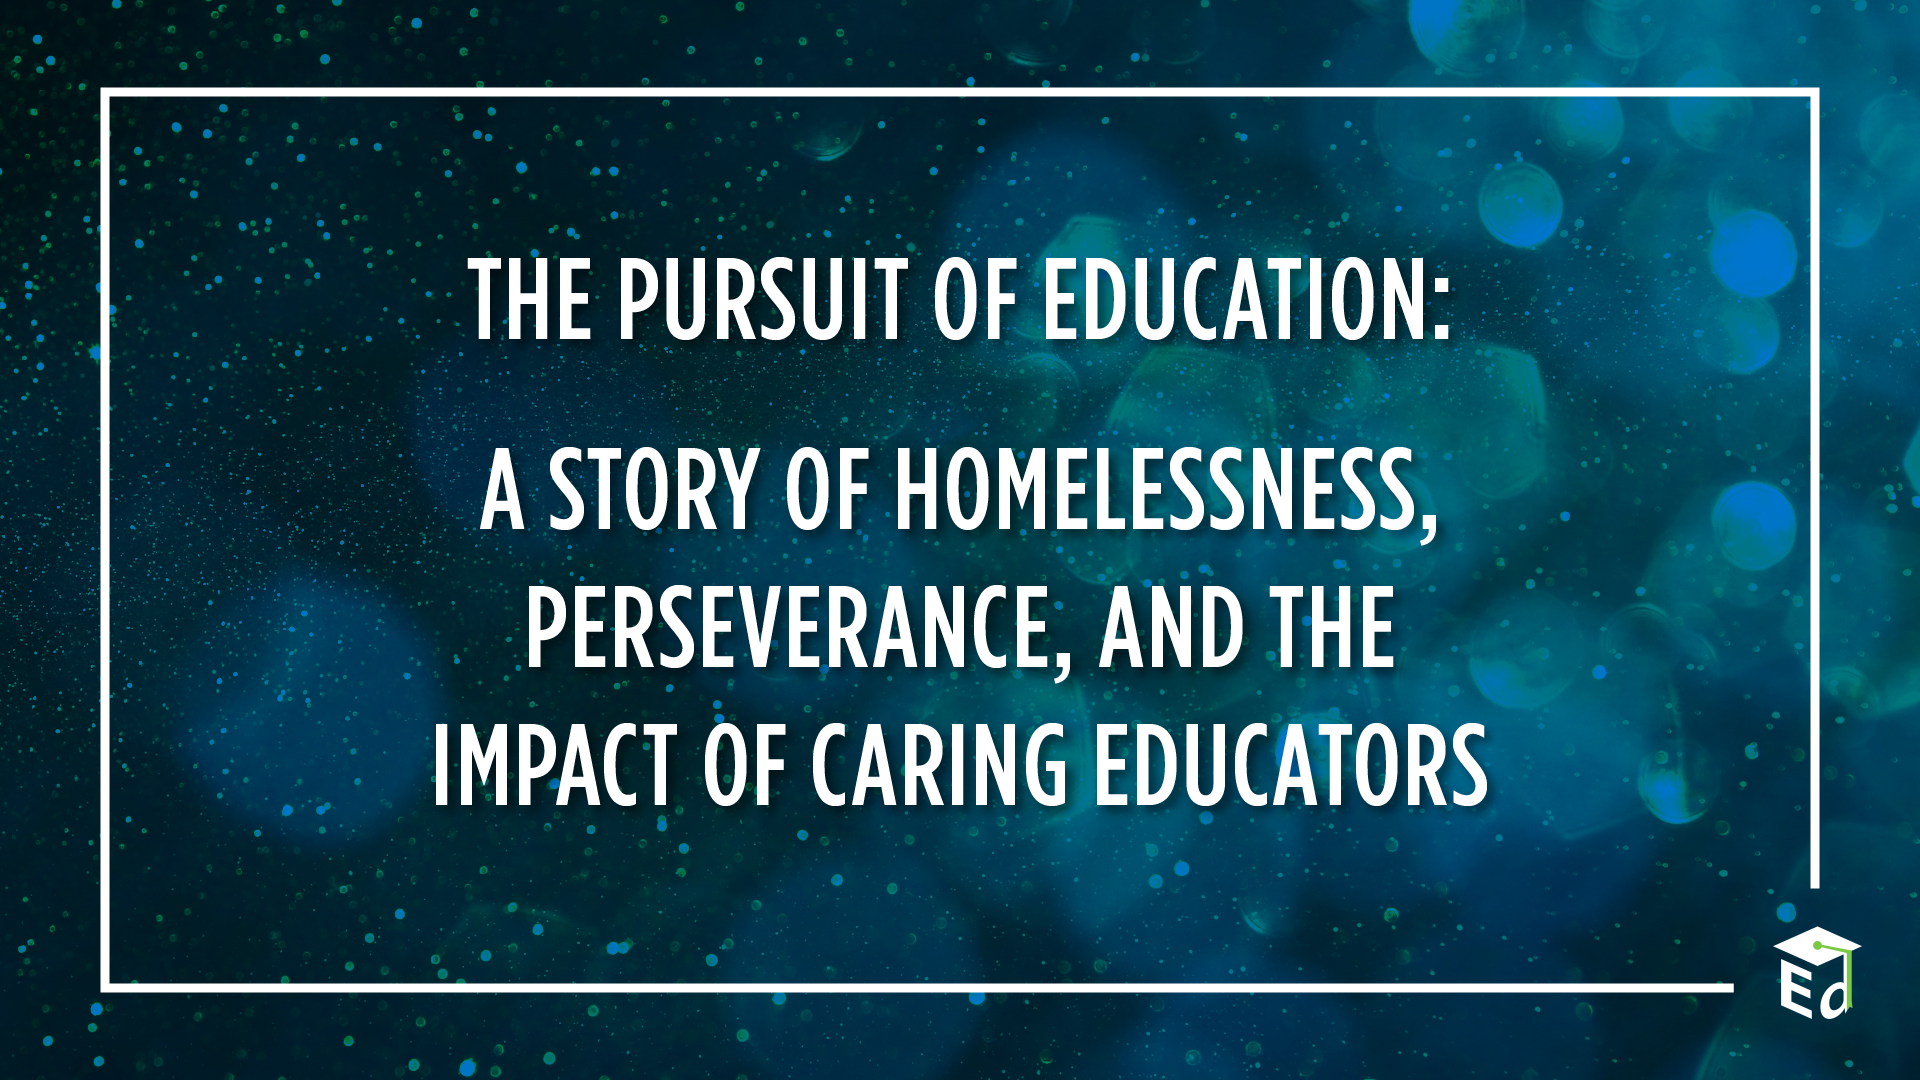 The pursuit of education: a story of homelessness, perseverance, and the impact of caring educators